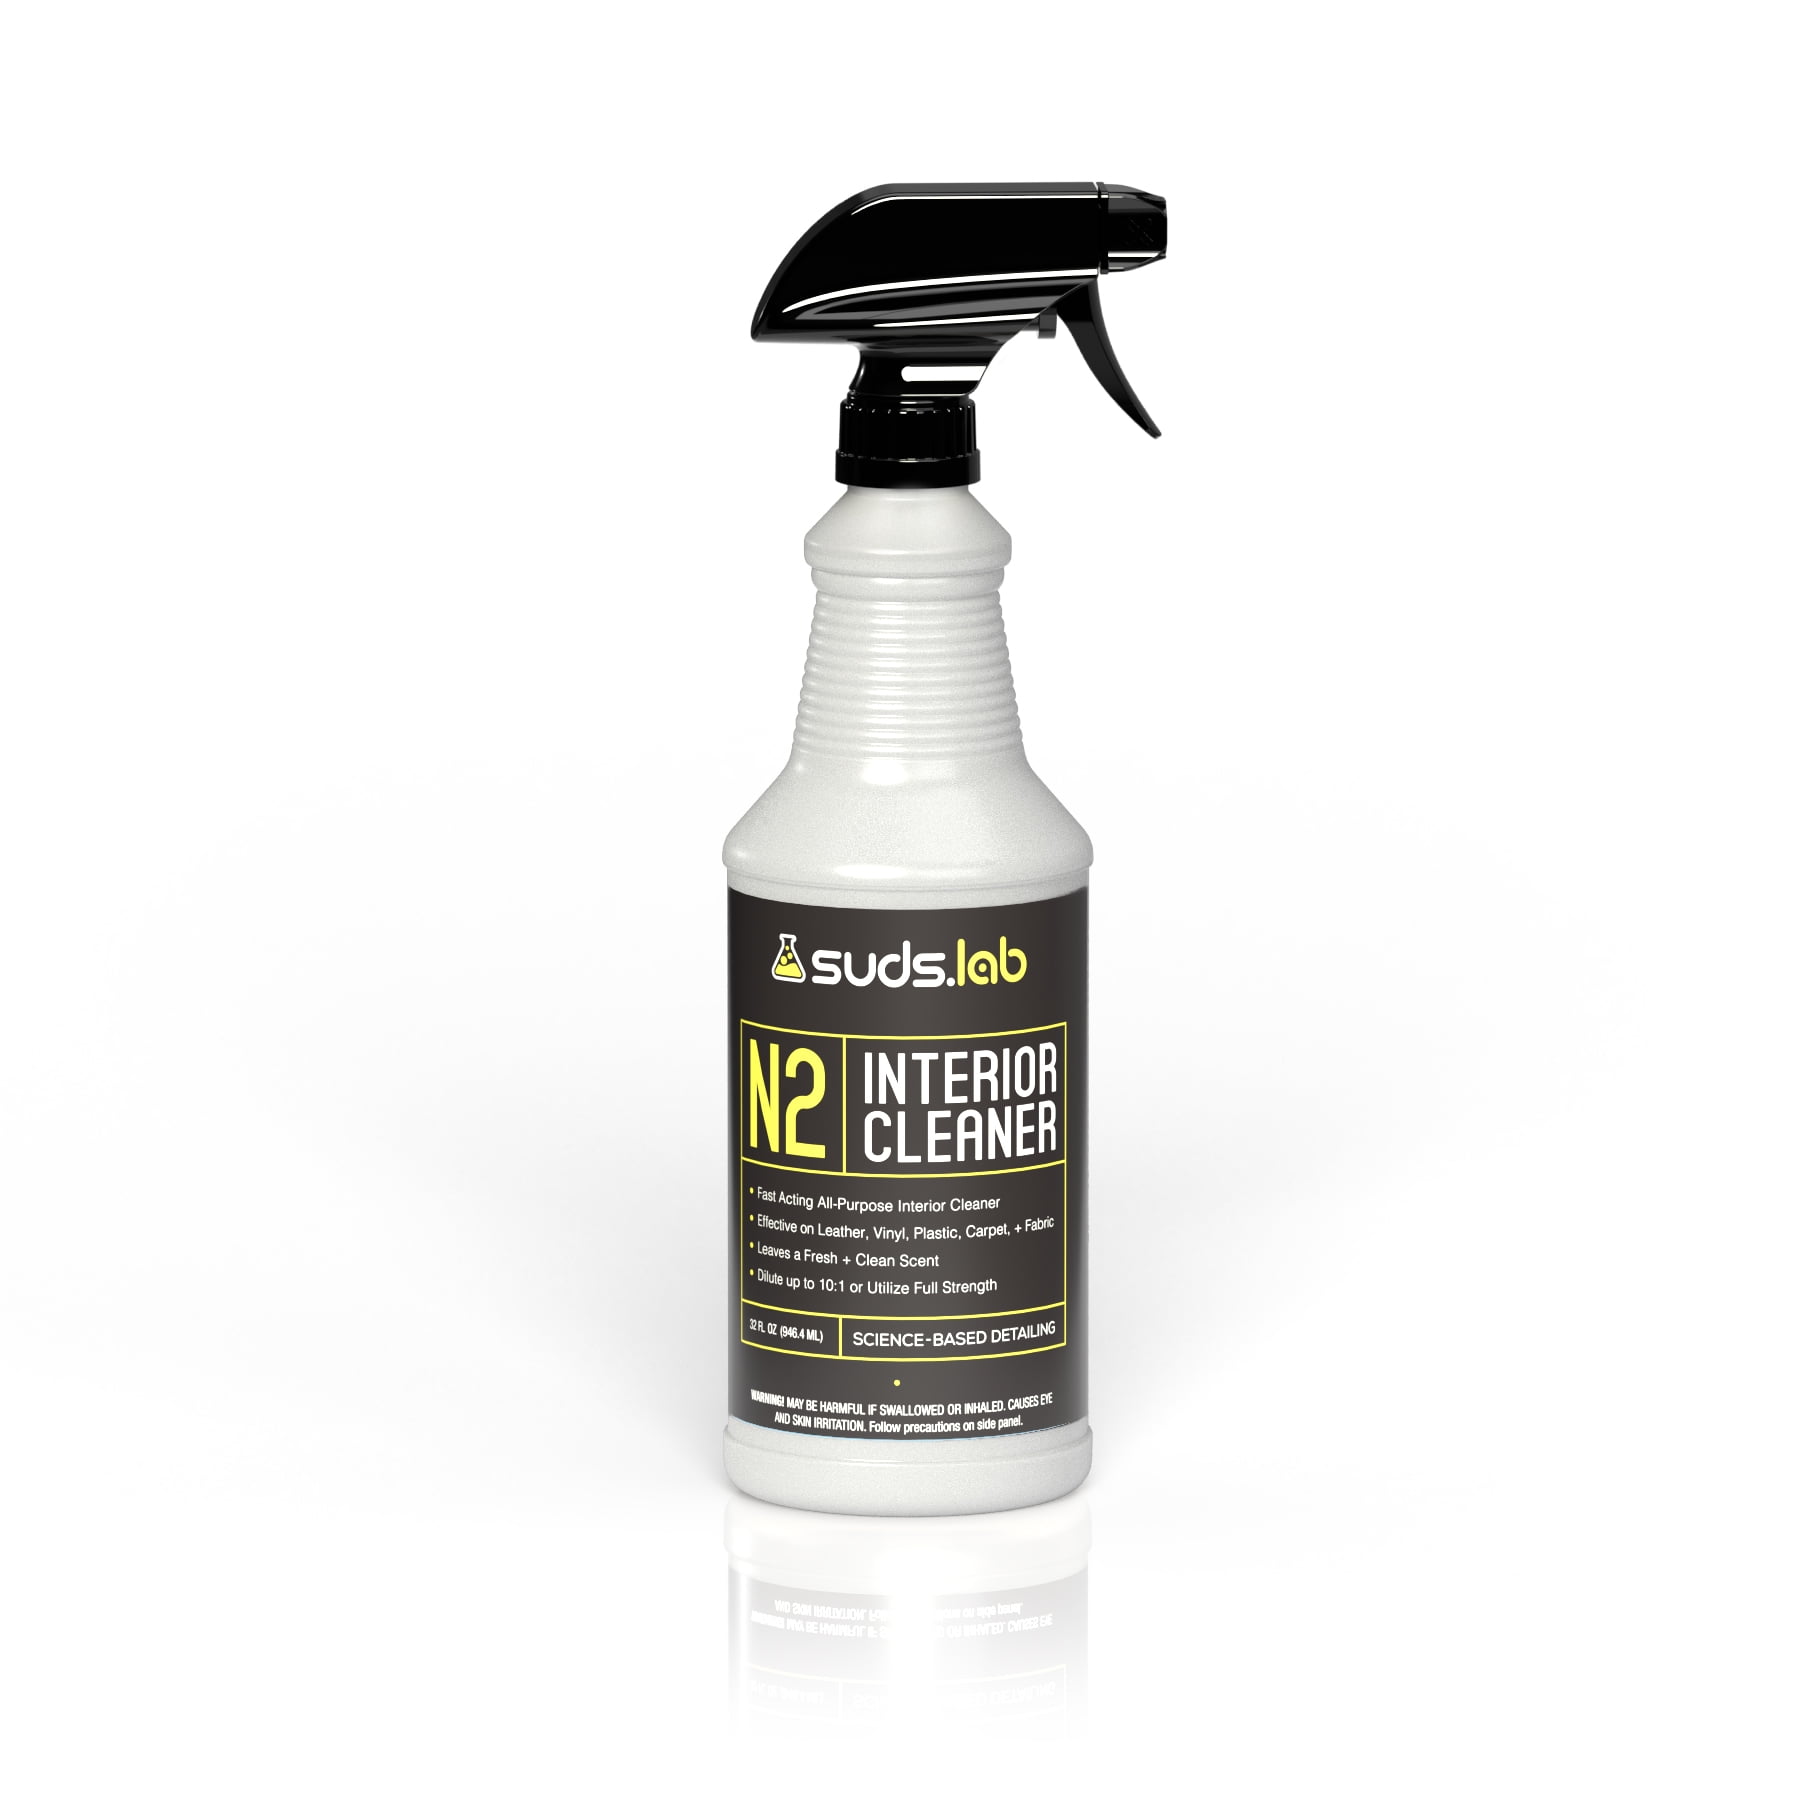 NG Interior Cleaner Complete - Celeste Industries Corporation